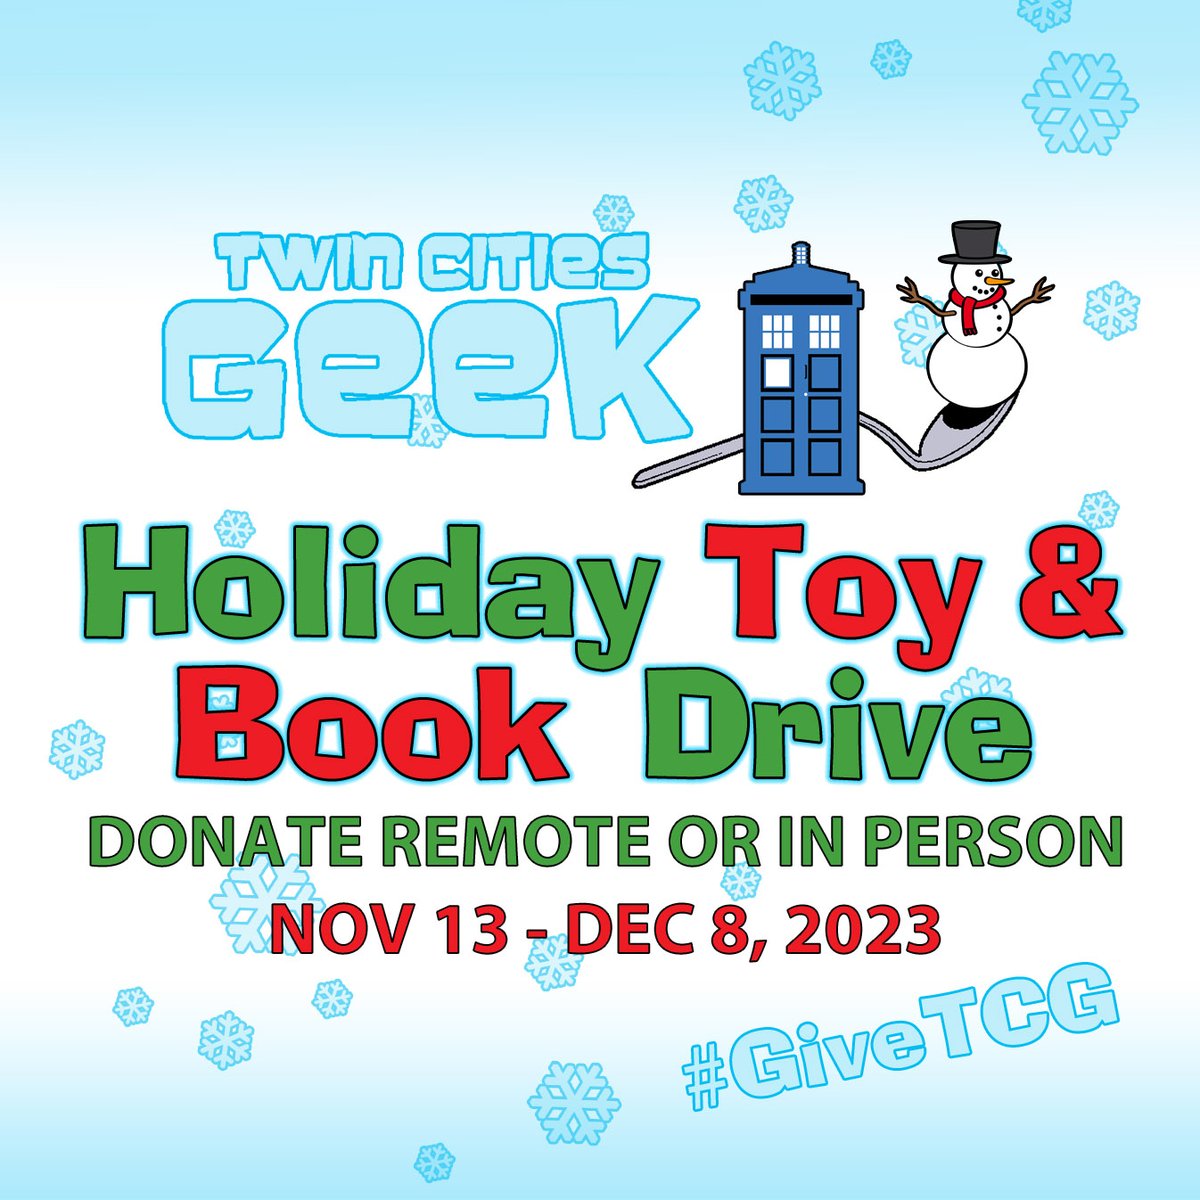 The MN geek community's annual grassroots Holiday Toy & Book Drive returns for its 9th year! Visit a donation box in the metro by December 8 to #GiveTCG! 👉 TwinCitiesGeek.com/ToyDrive